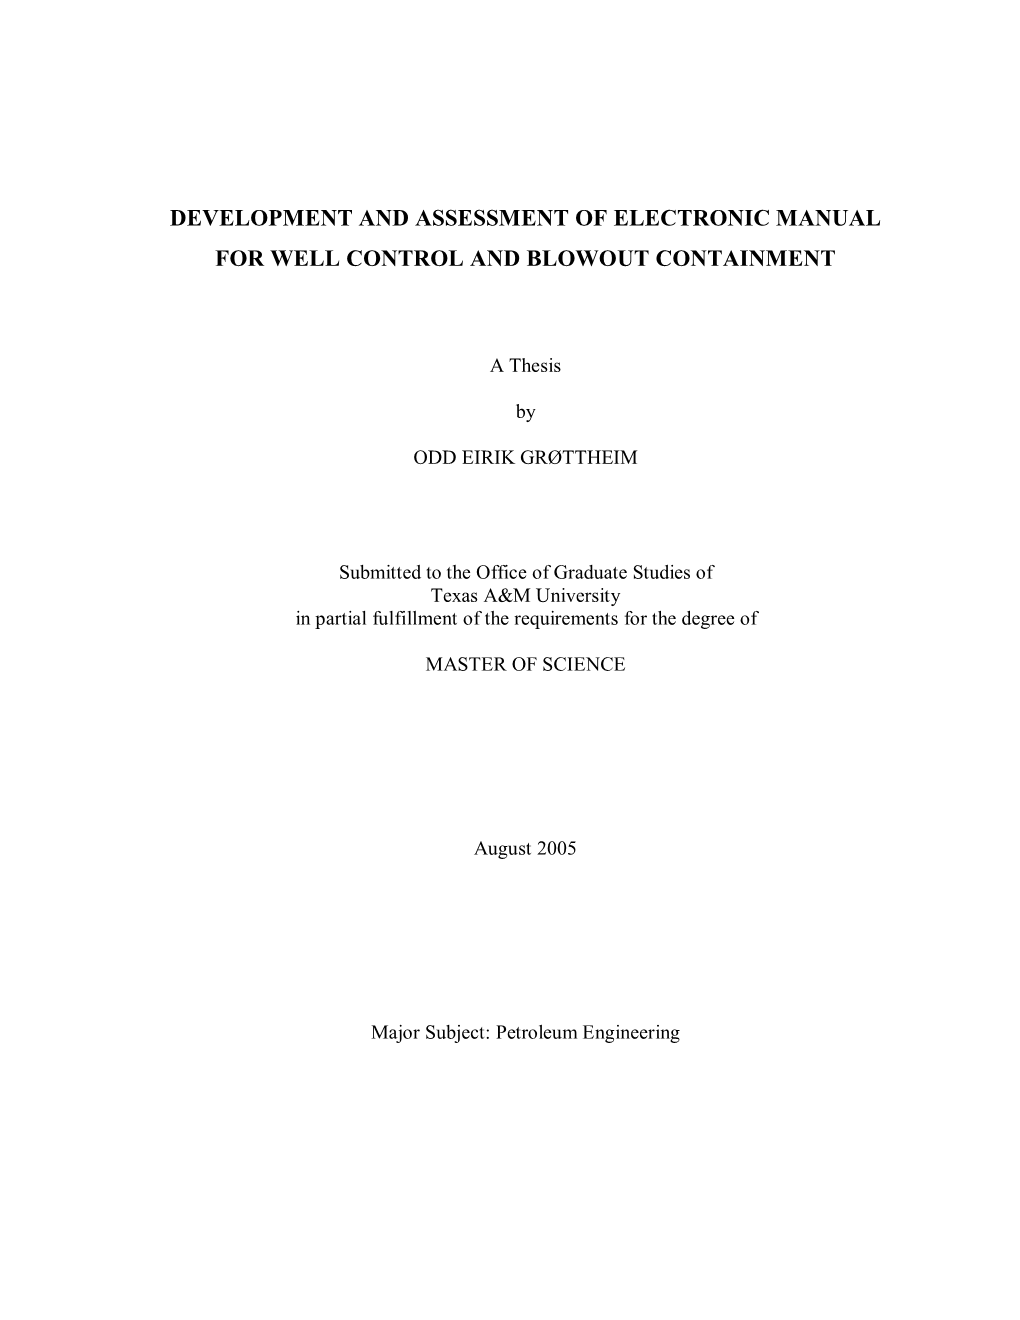 Development and Assessment of Electronic Manual for Well Control and Blowout Containment